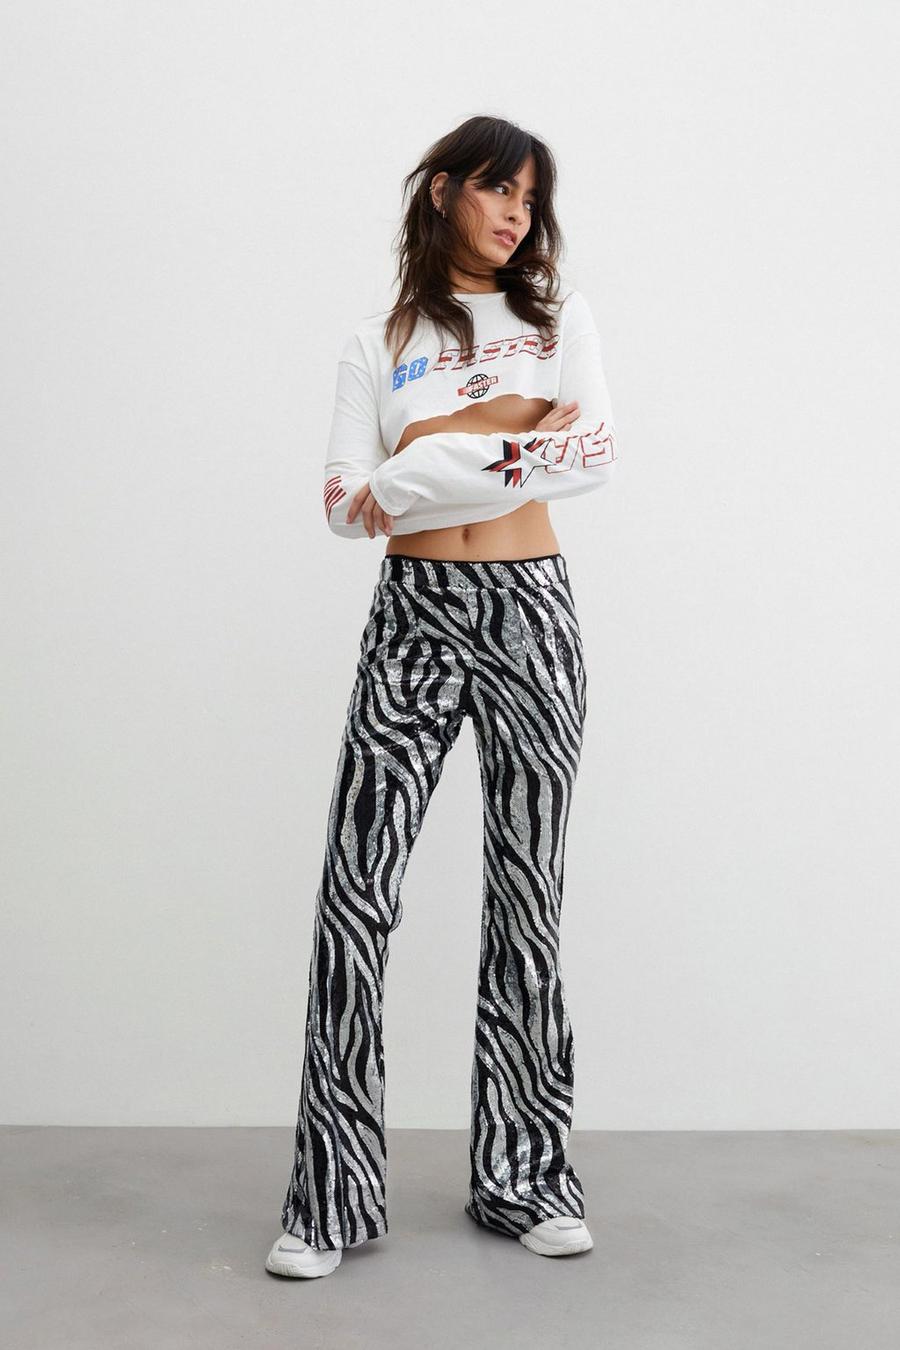 Sequin Fit and Flare Zebra Print Pants